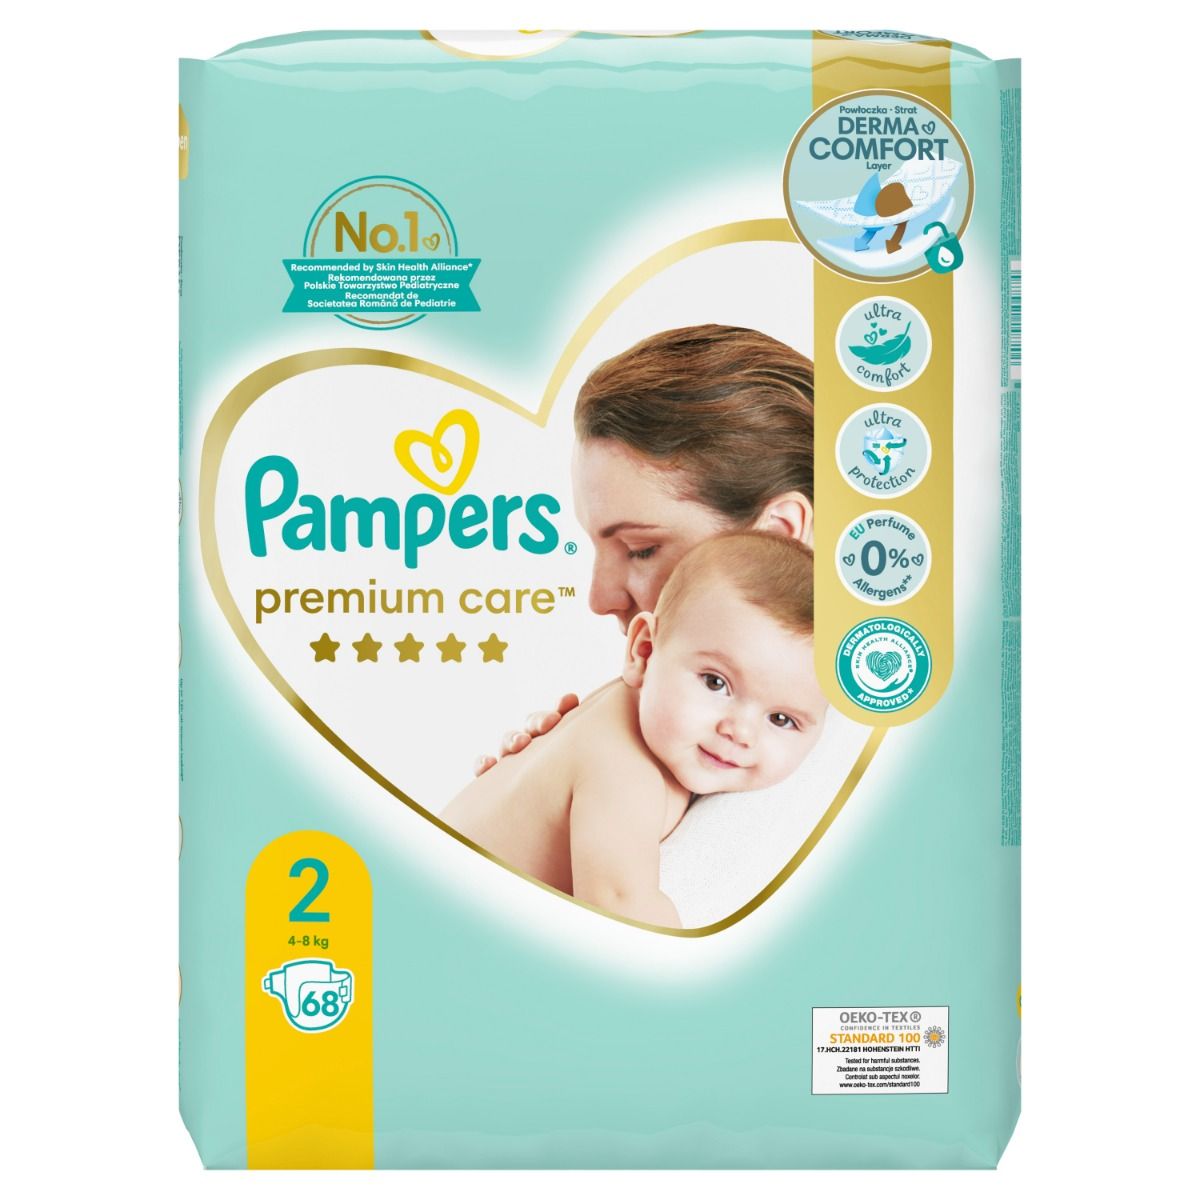 auchan promocja pampers